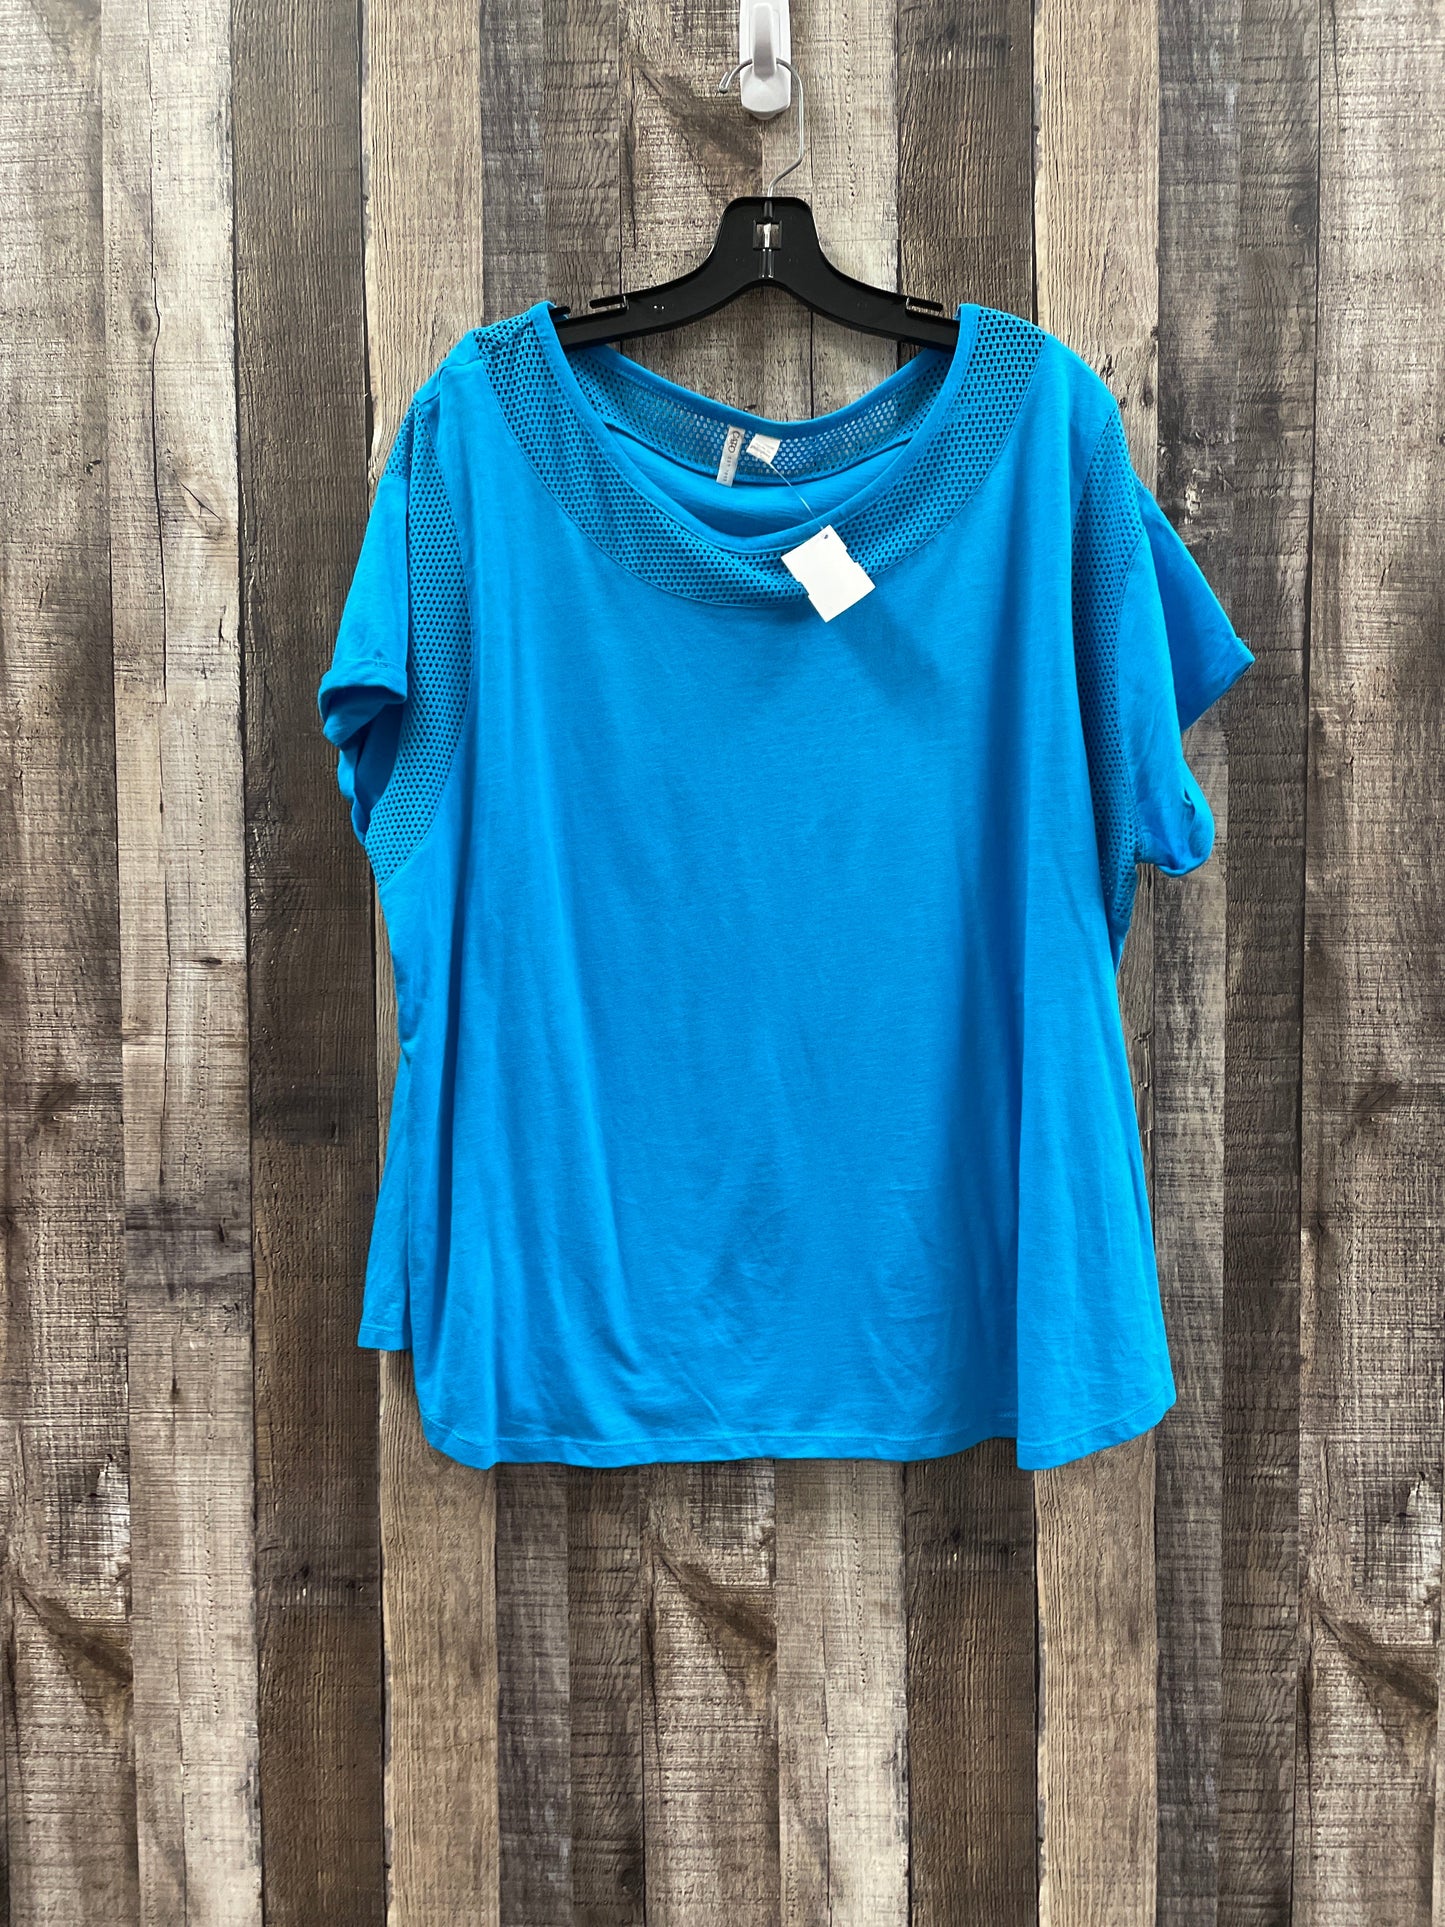 Blue Top Short Sleeve Cato, Size 4x (26/28)